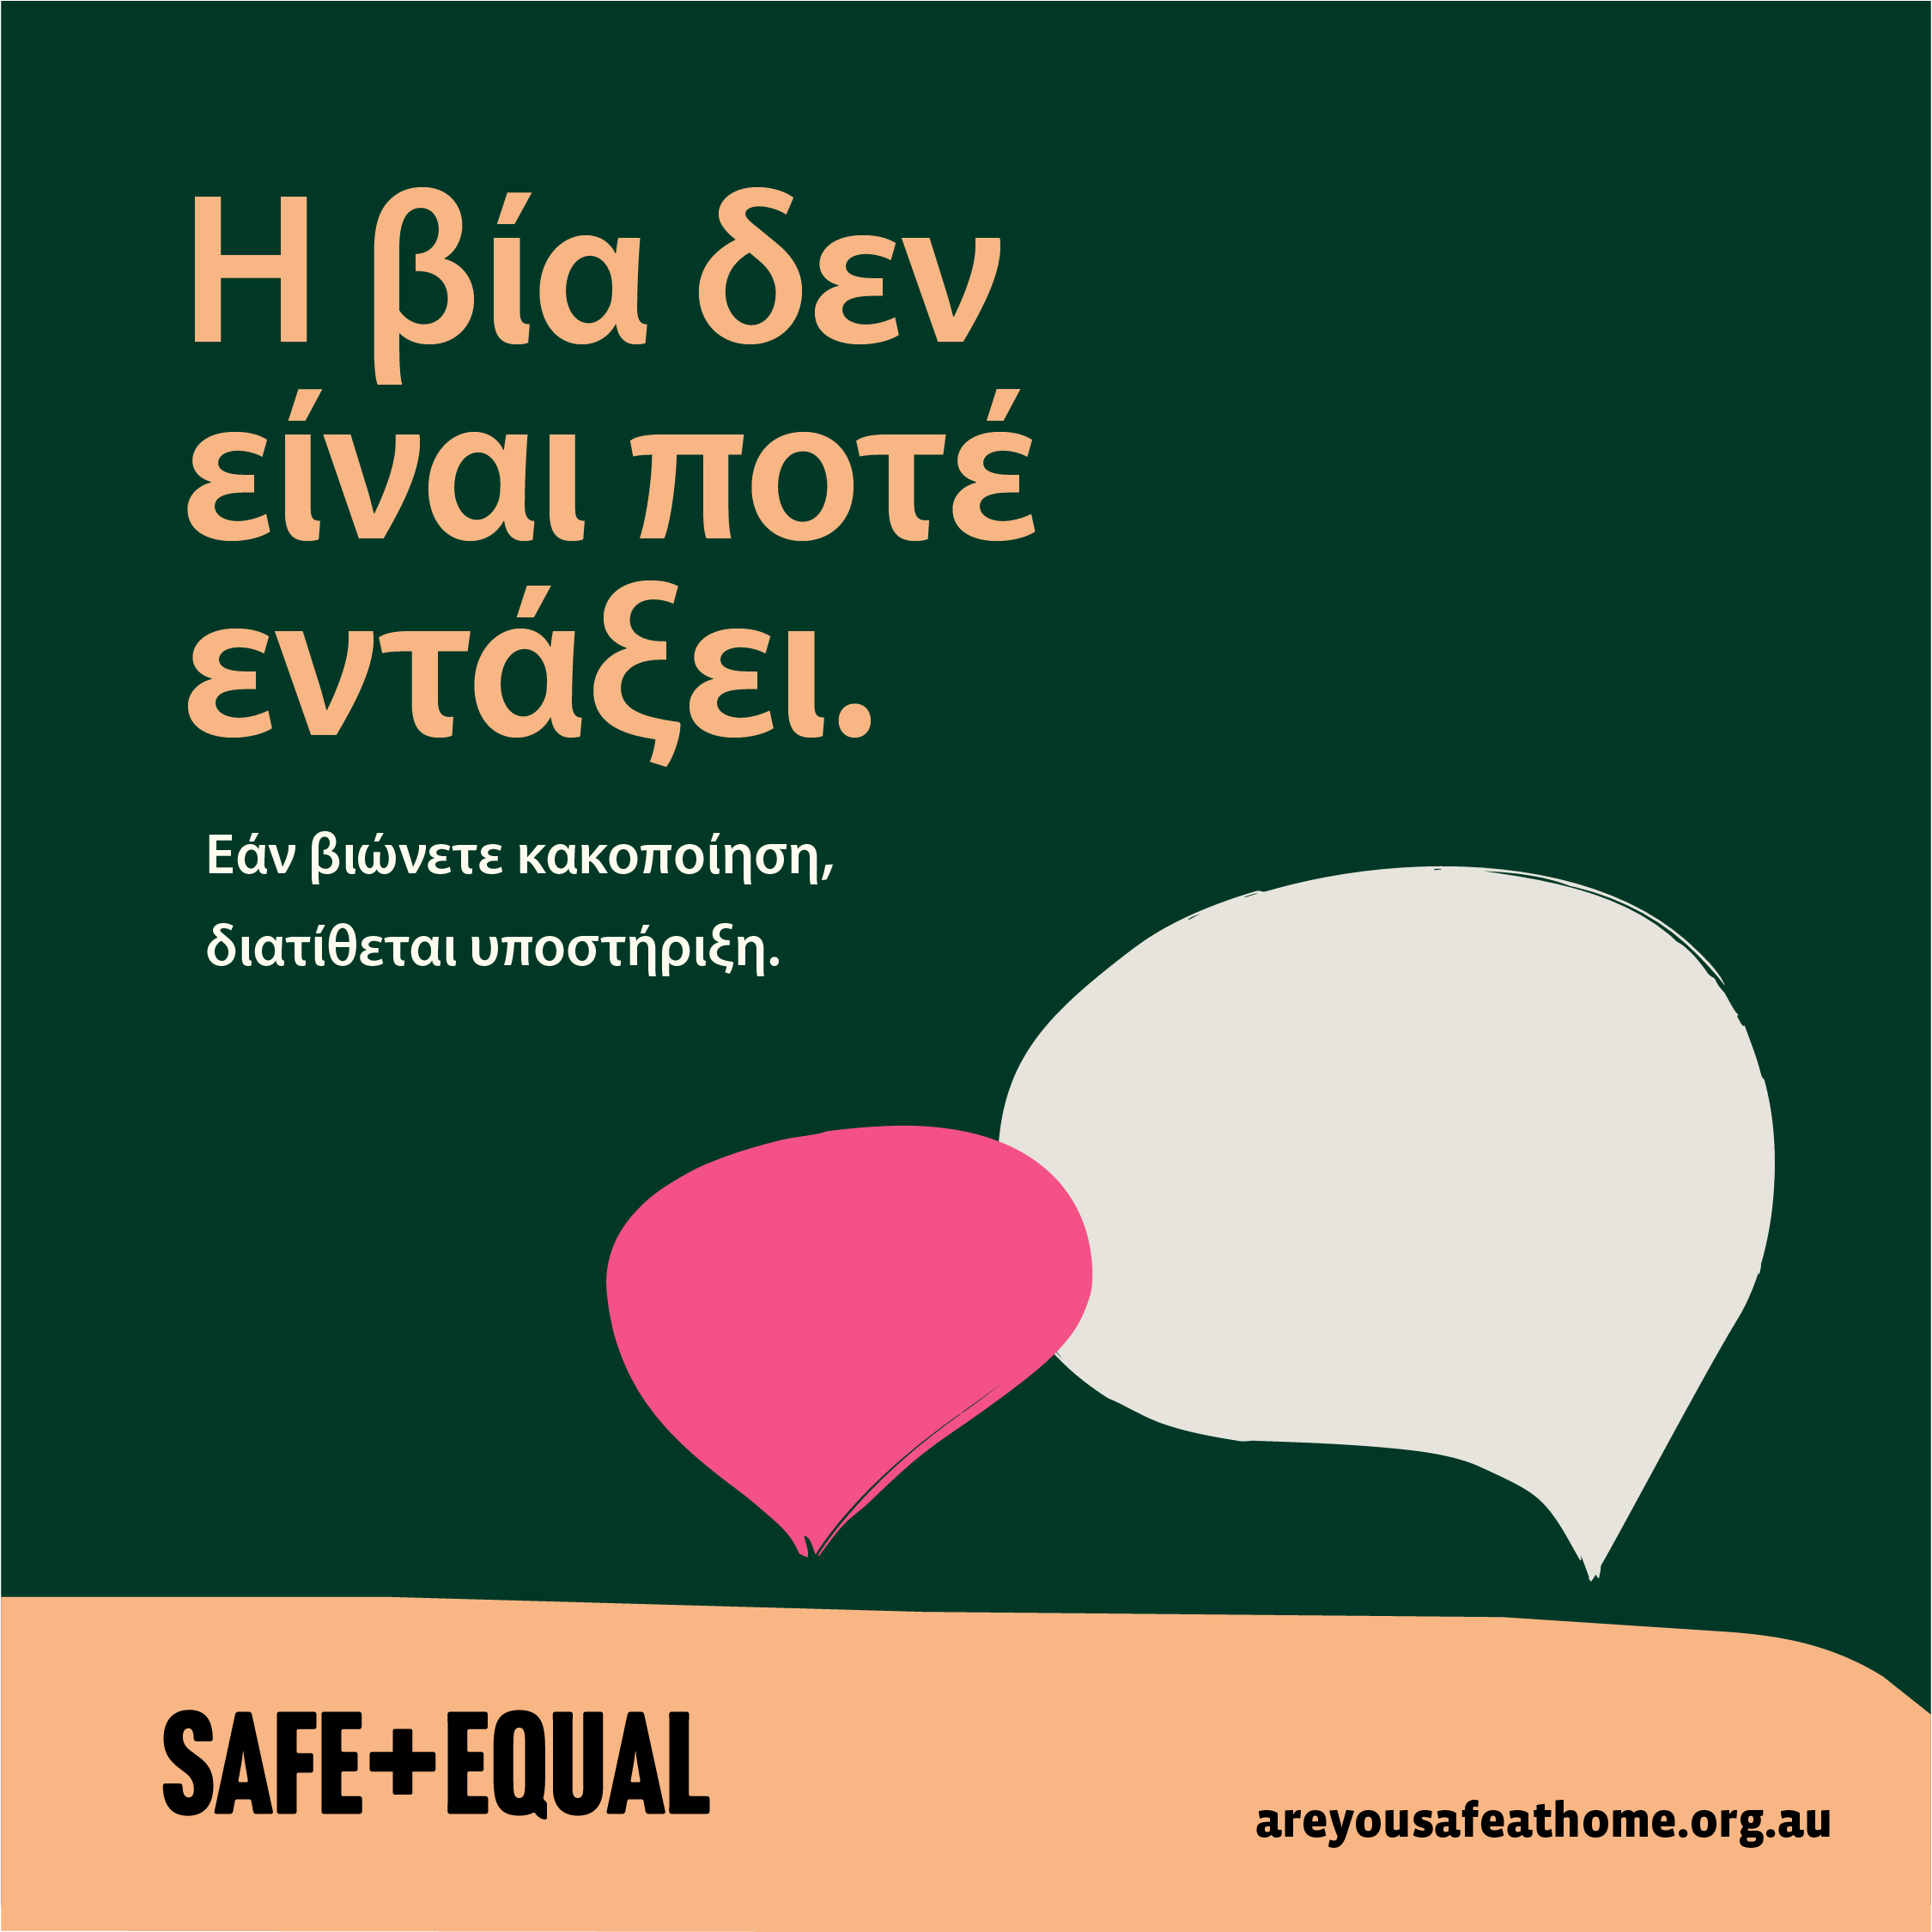 Social media tile for Are you safe at home translated into Greek